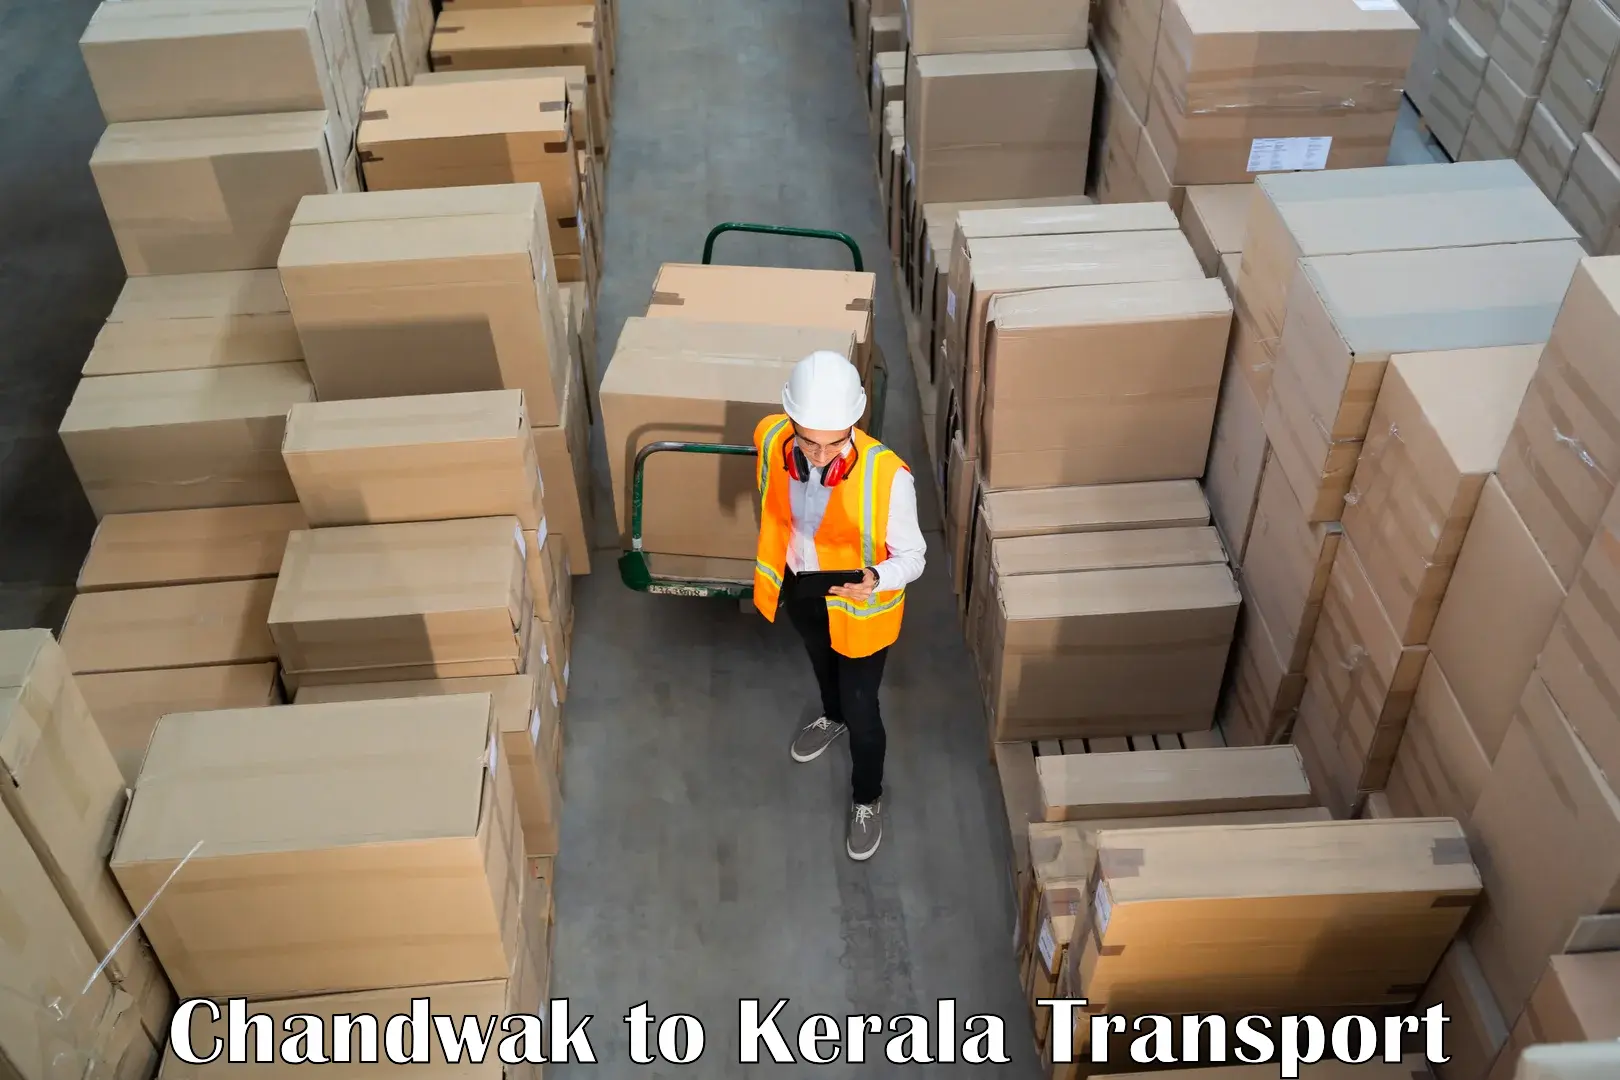 Transport shared services in Chandwak to Ernakulam